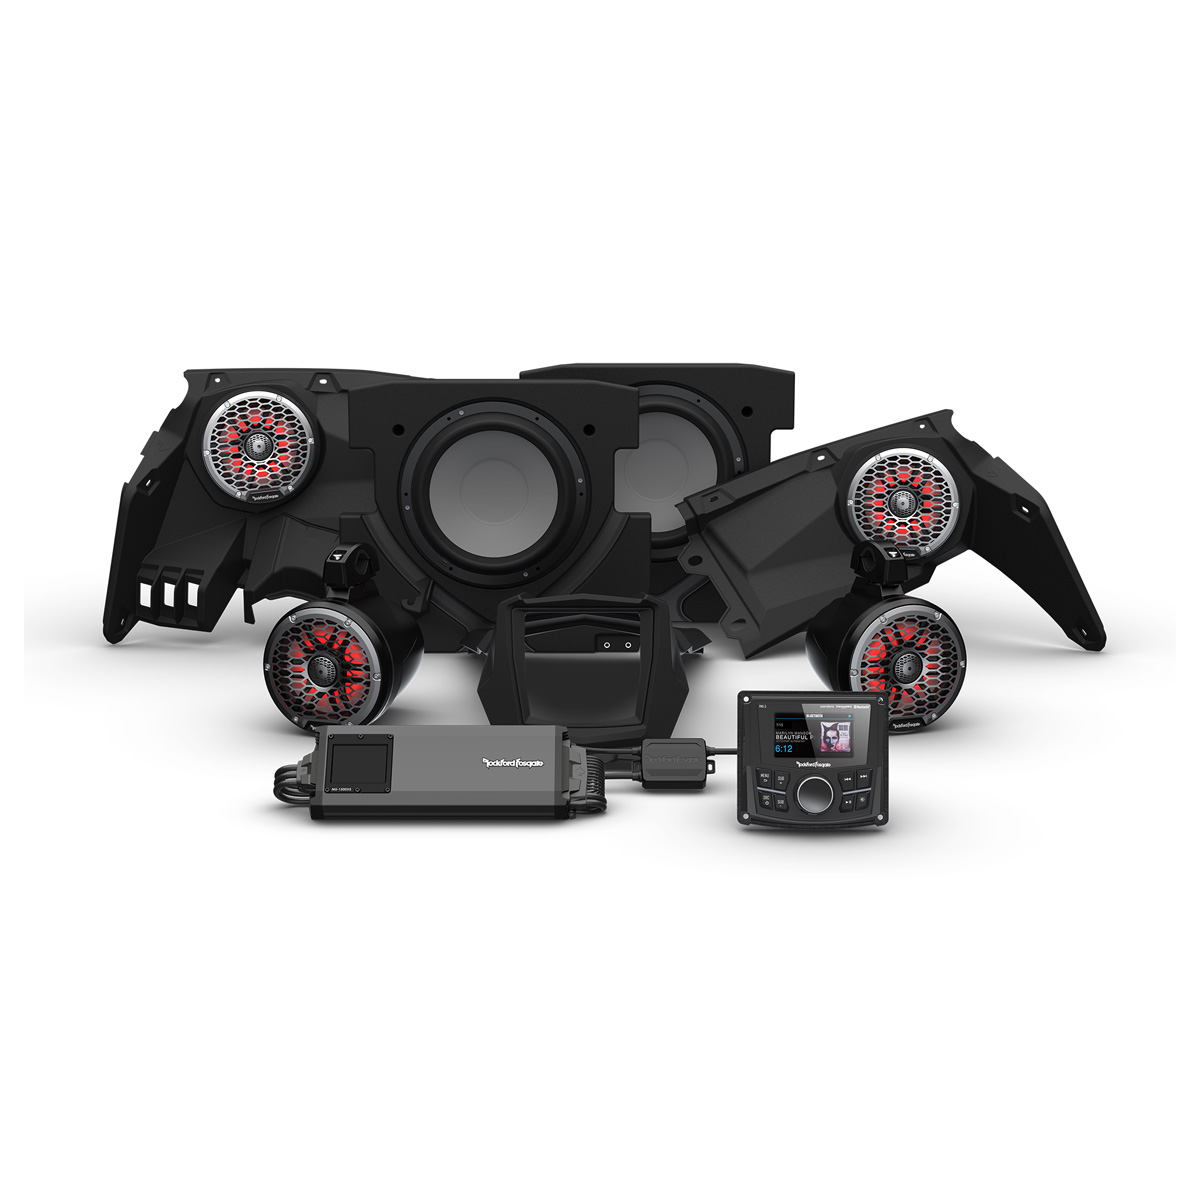 Rockford Fosgate X317STG5 CanAm X3 Stereo Package